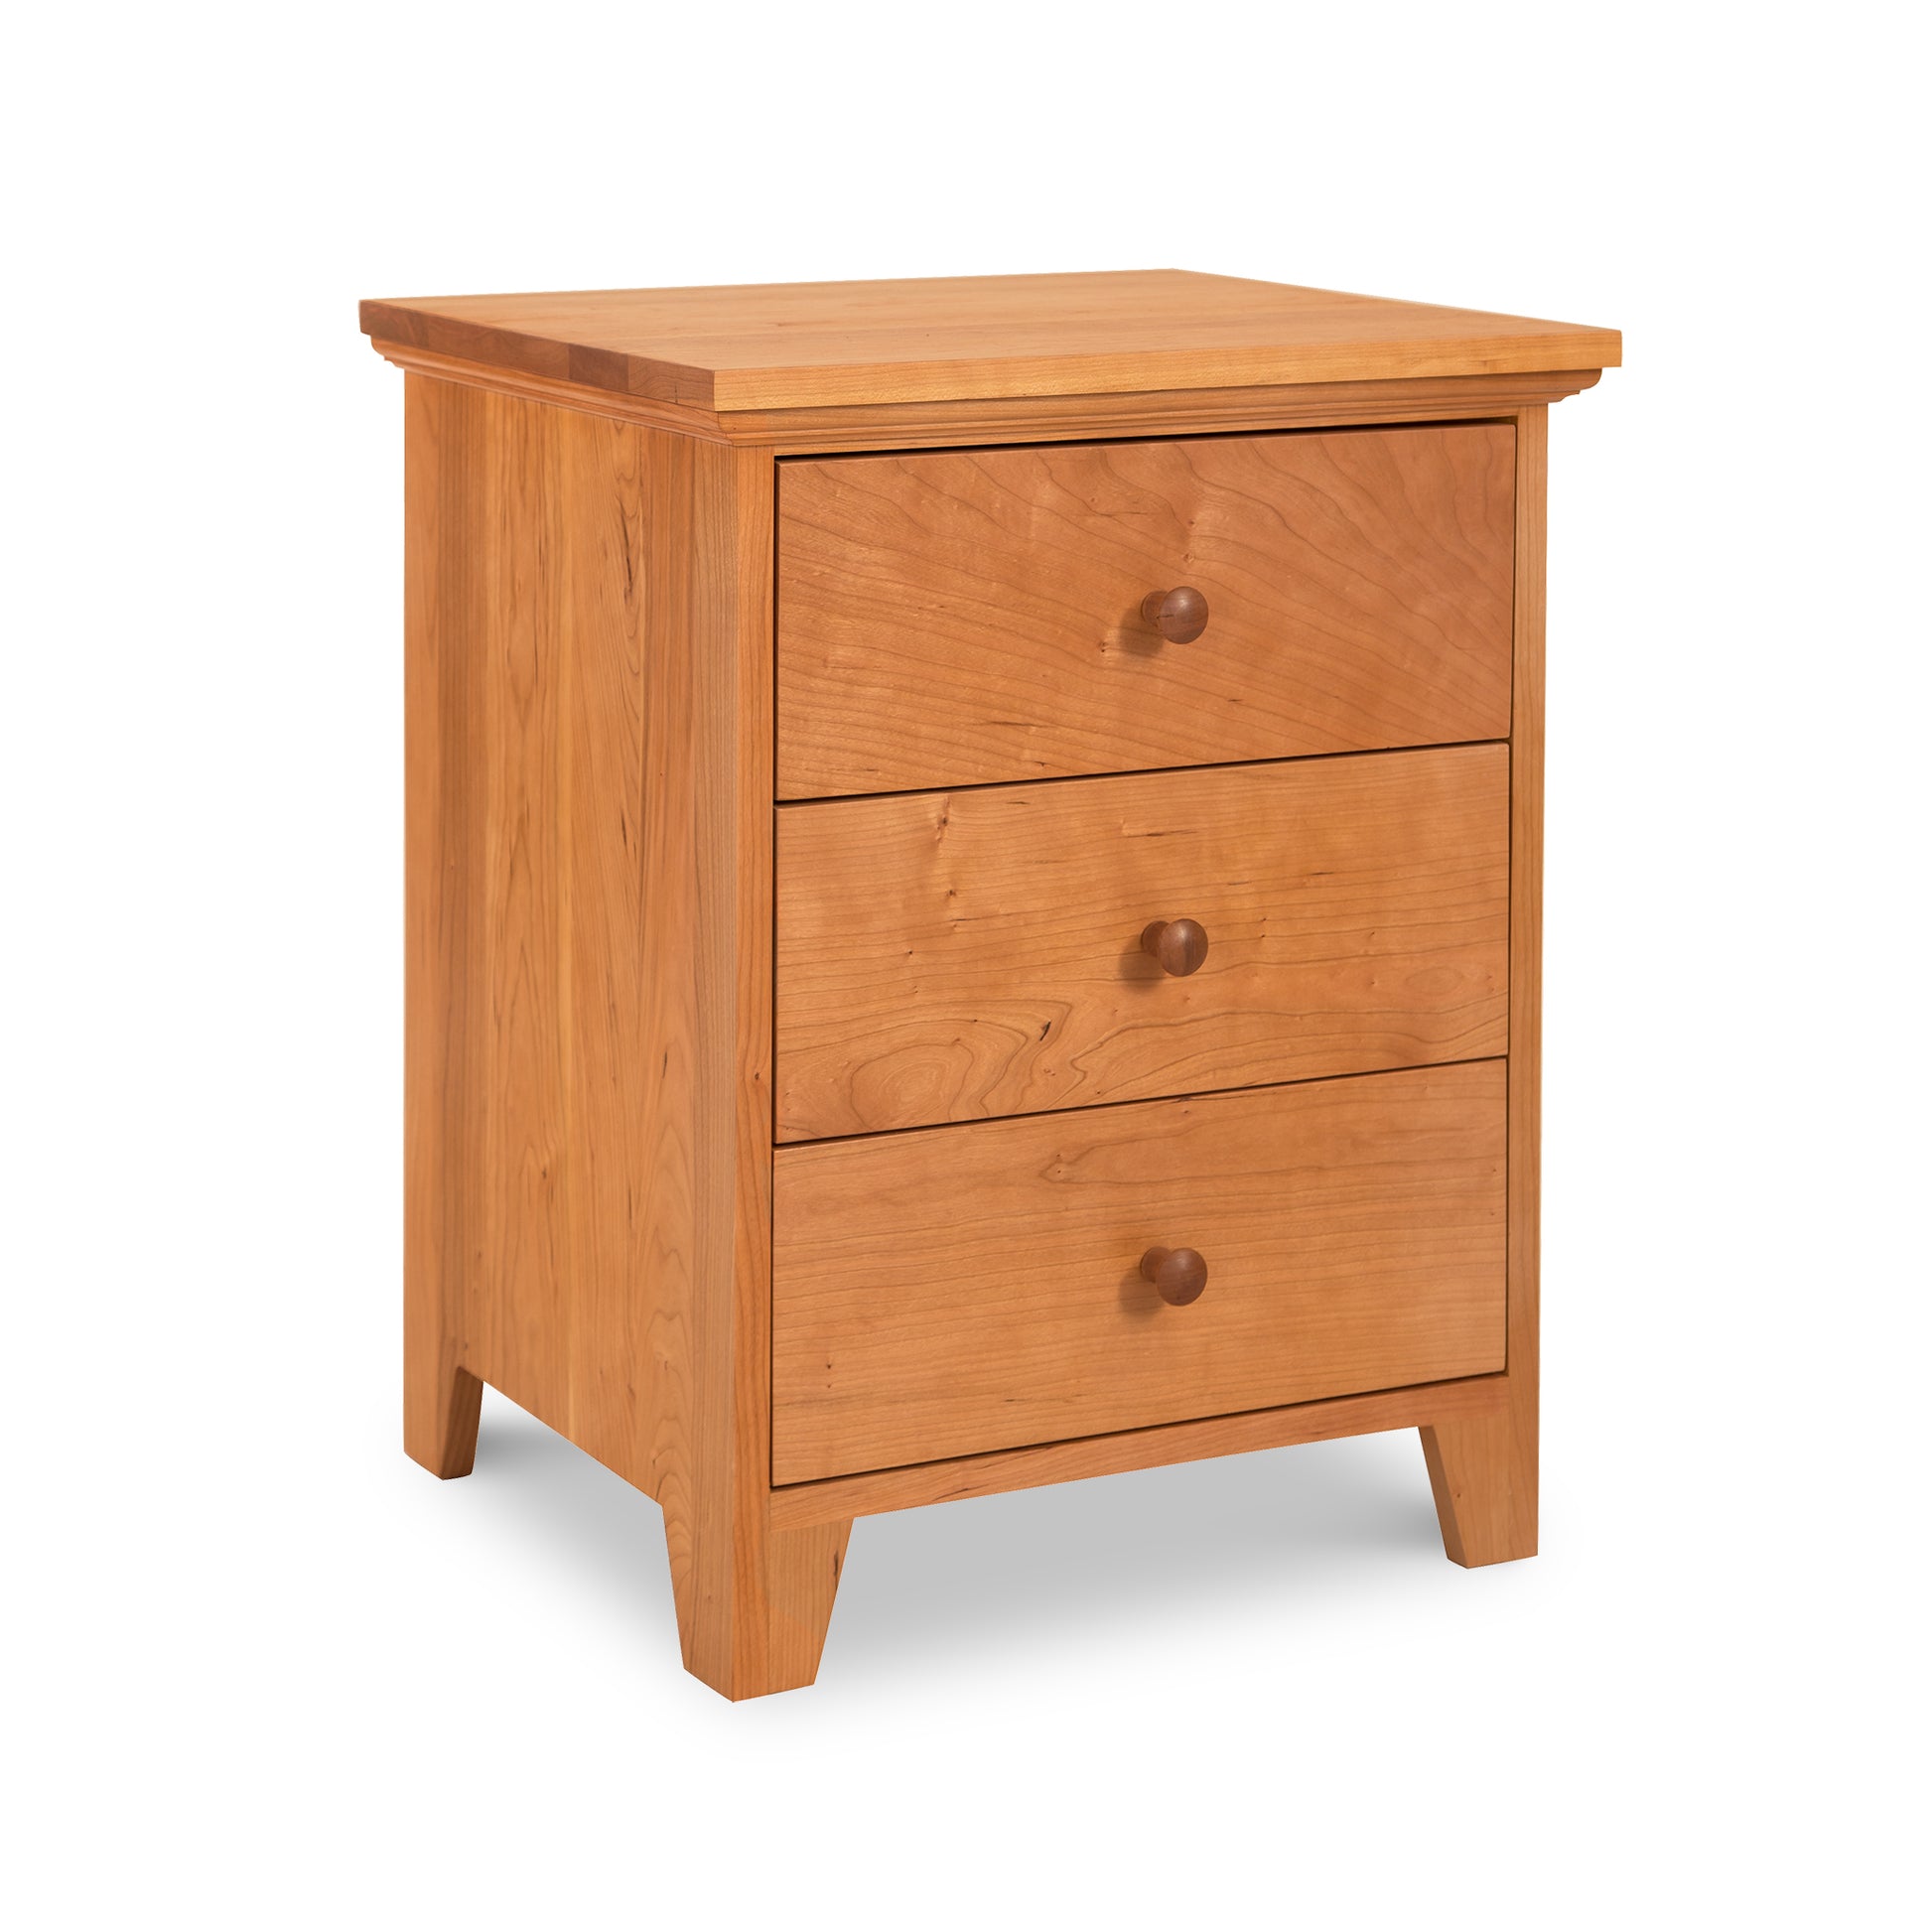 A Lyndon Furniture American Country handcrafted solid wood 3-Drawer Nightstand.